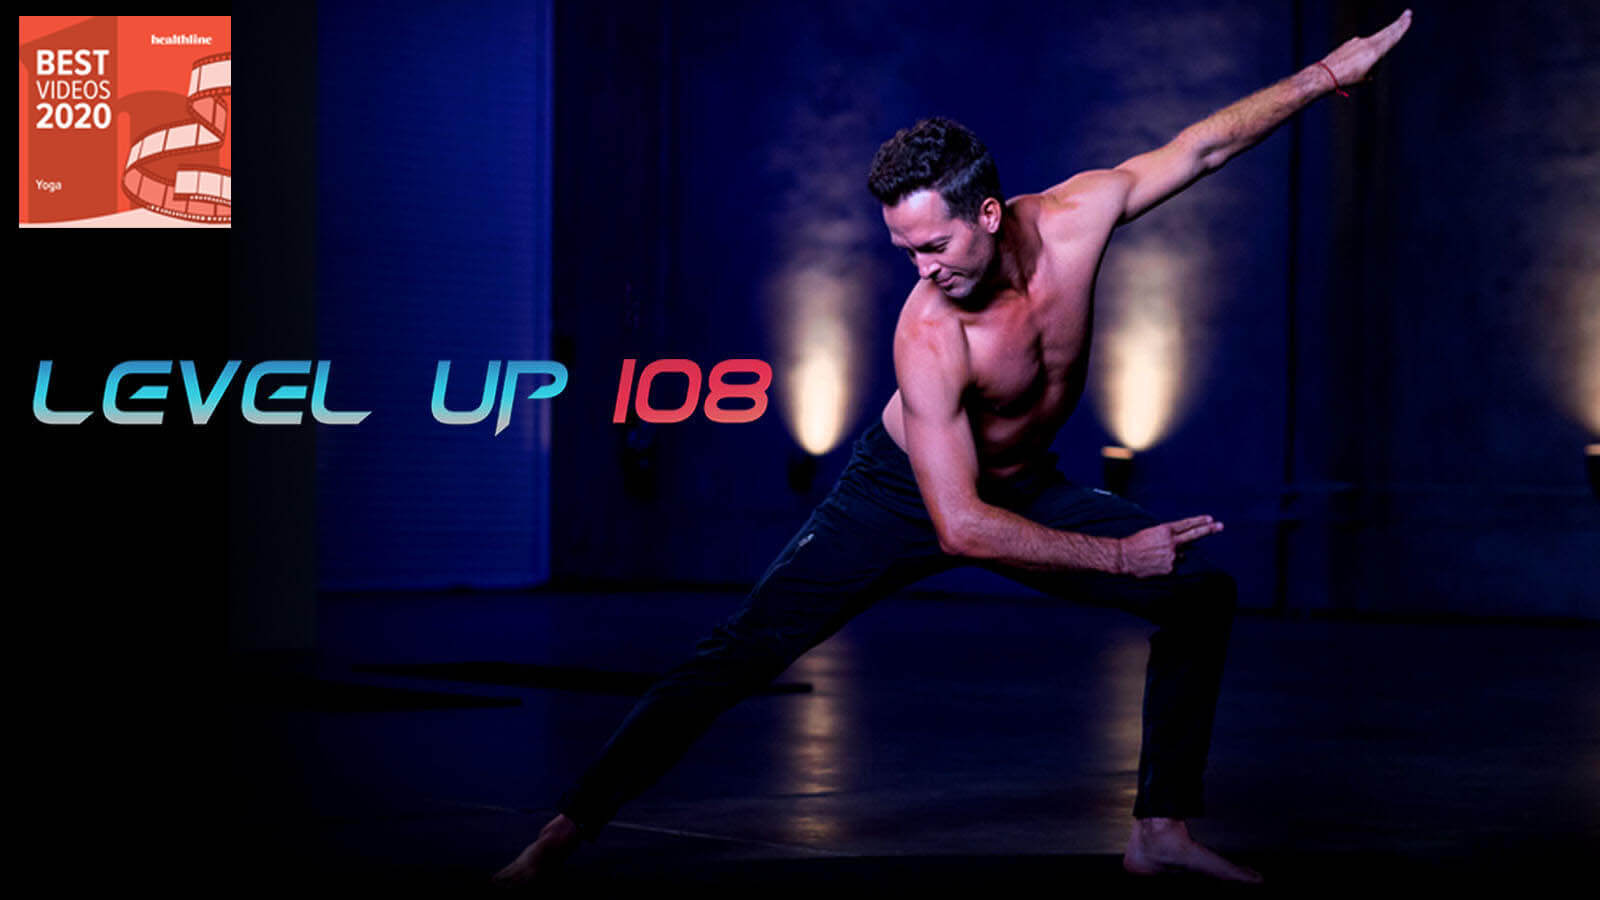 Best Yoga Video 2020 Level Up 108 with Travis Eliot